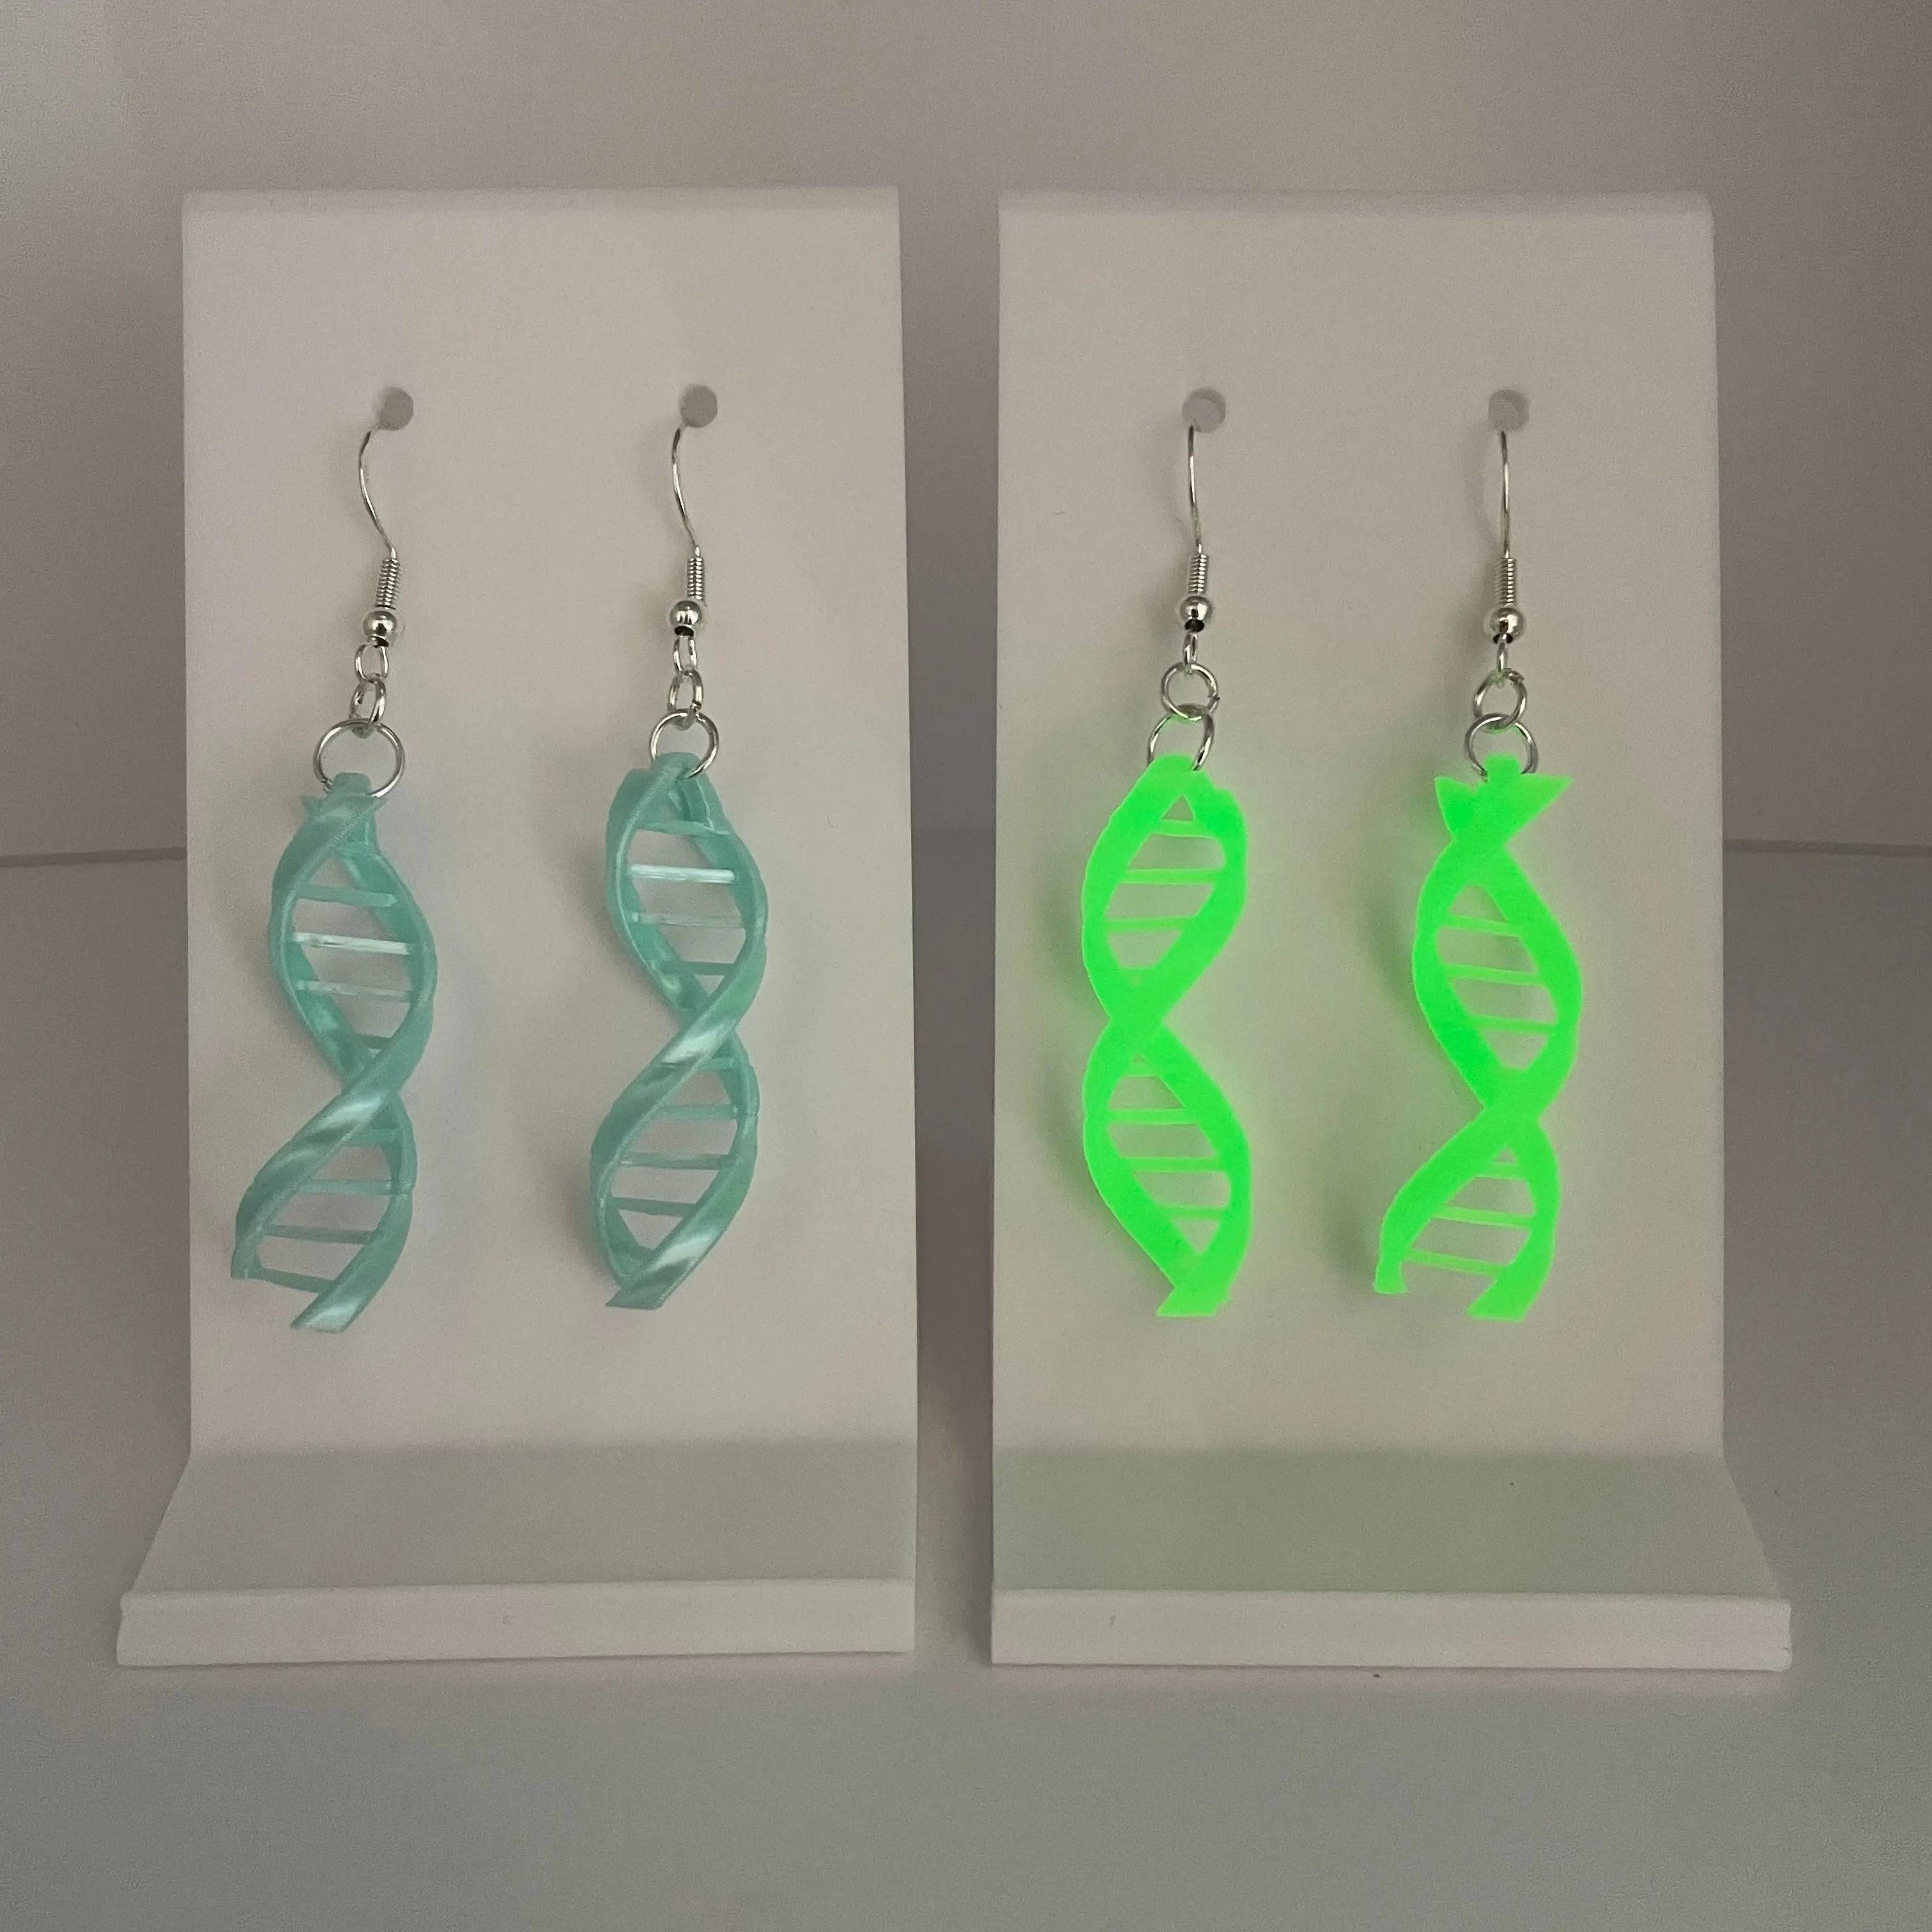 Double Helix DNA Dangle Earrings come in a shimmering light blue color and a glow-in-the-dark green.